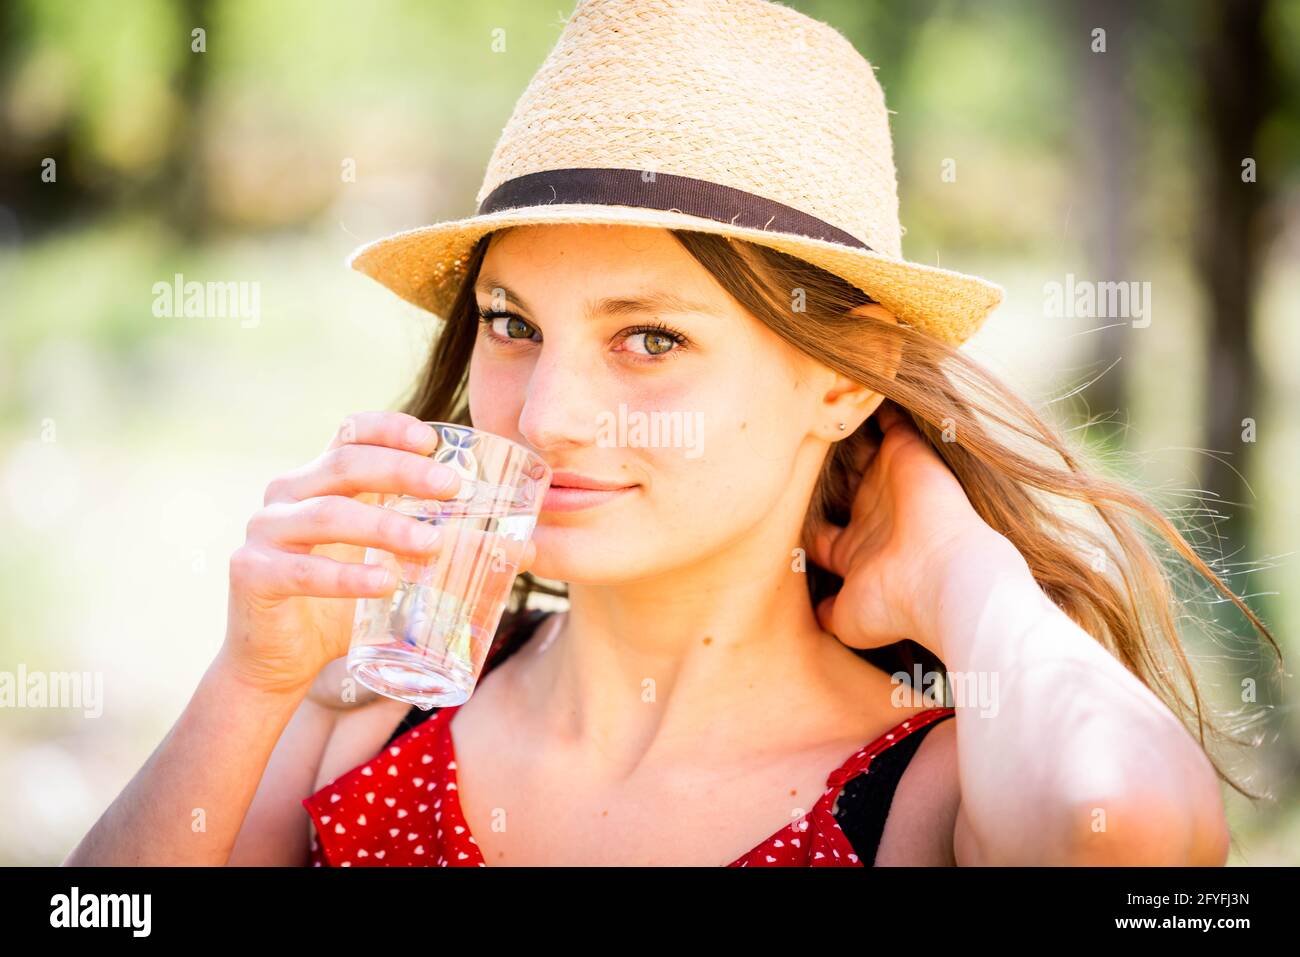 Woman drinking of glass of water. Stock Photo